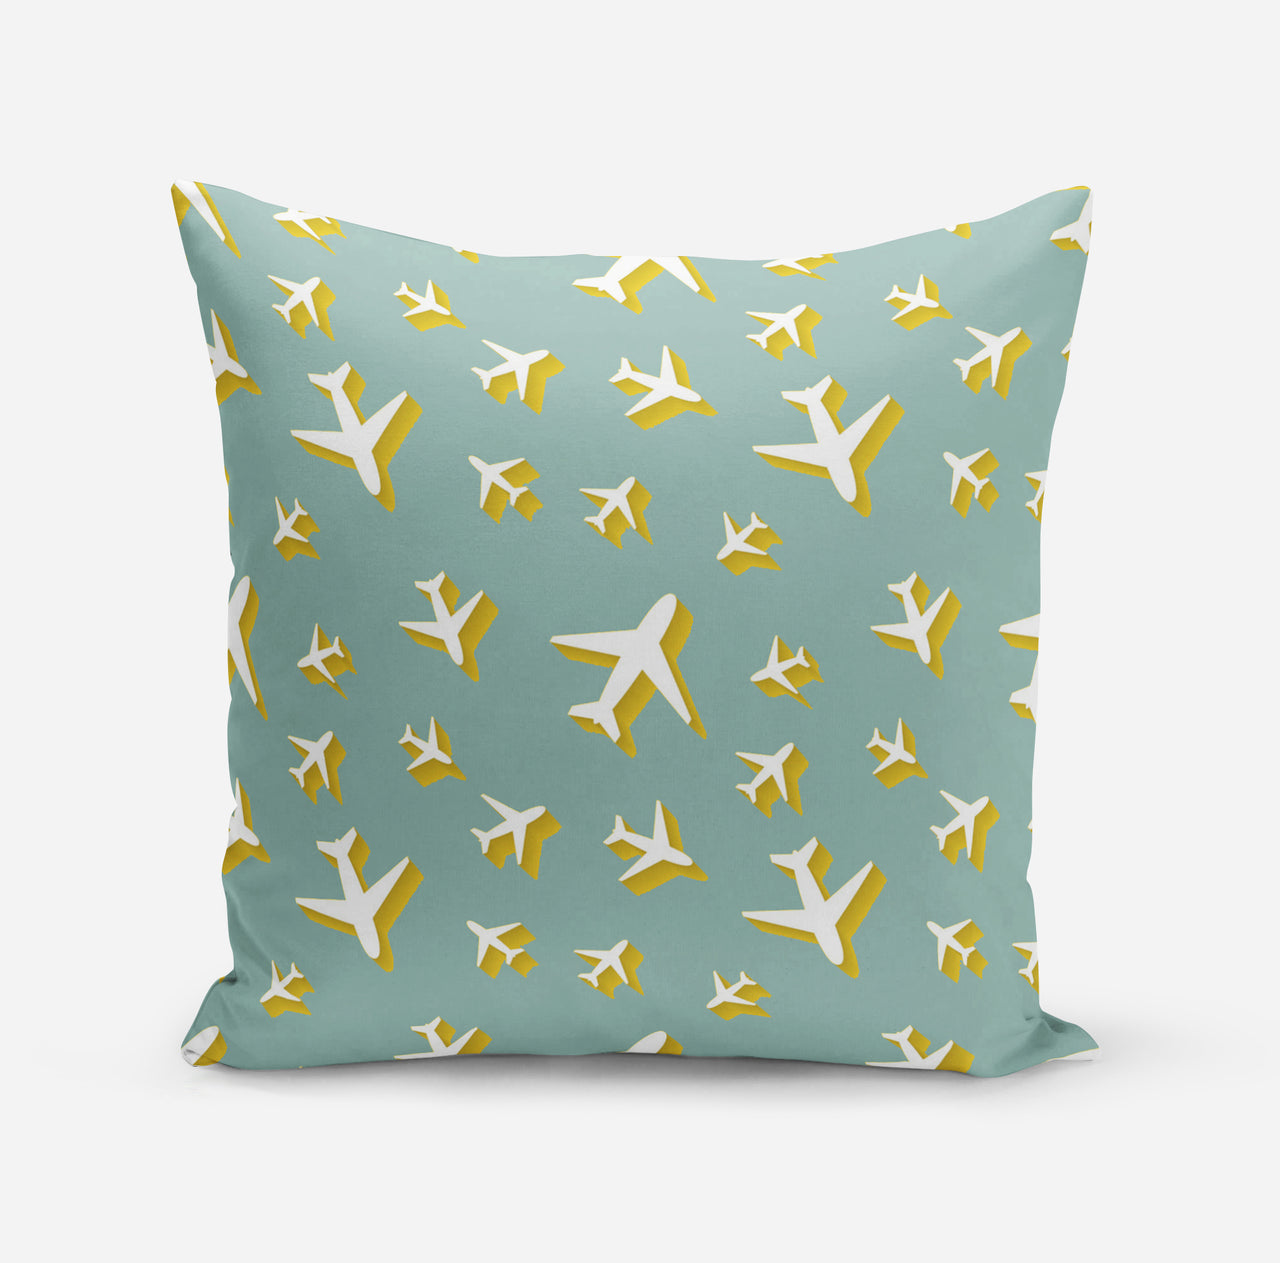 Mixed Size Airplanes Designed Pillows